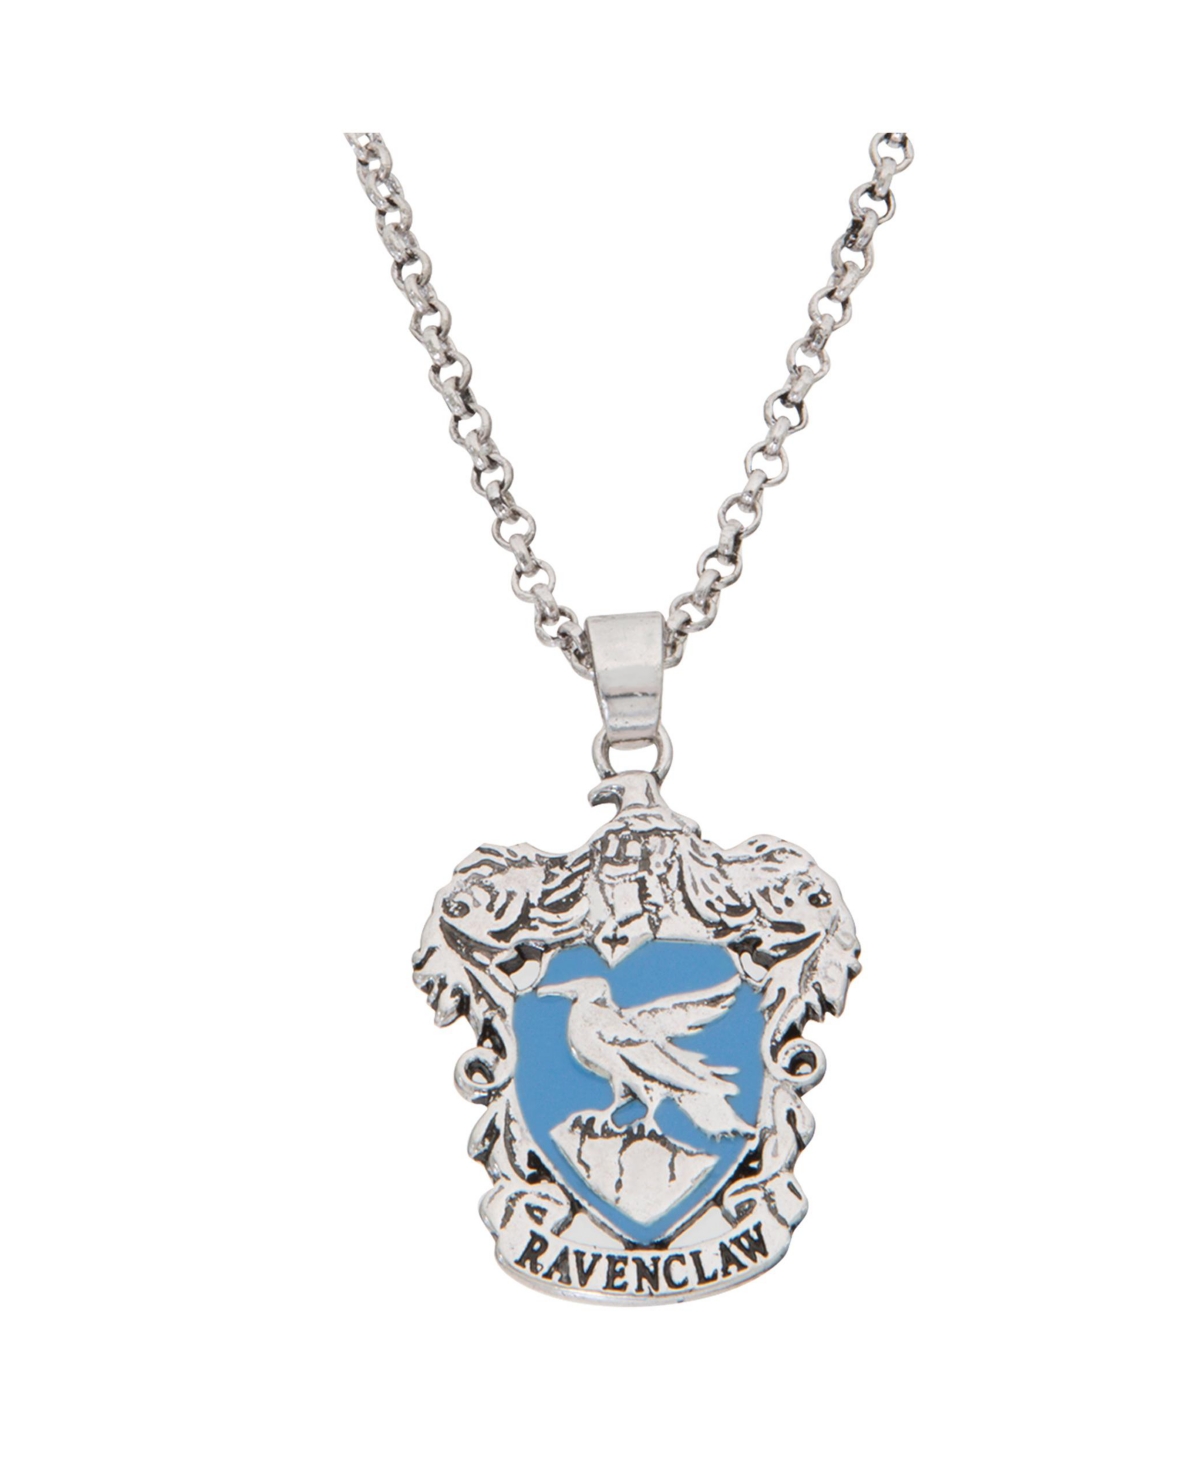 Womens Silver Plated House Pendant, Ravenclaw - 16 + 2'' - Silver tone, blue